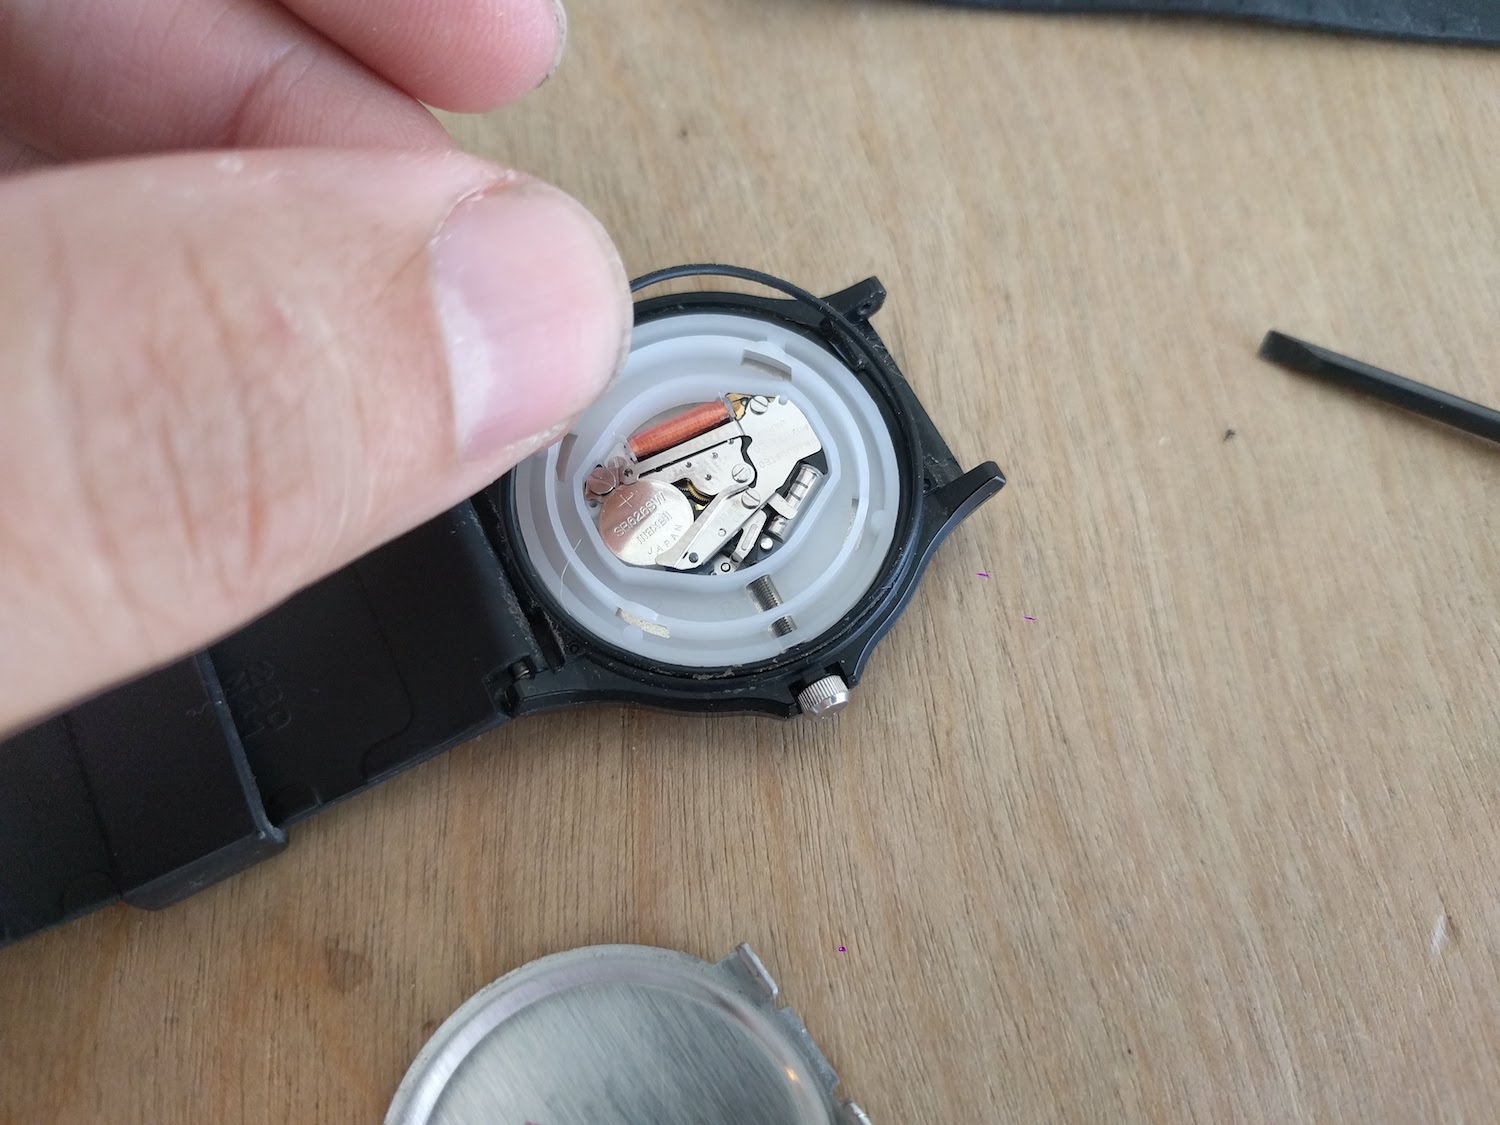 Casio MQ-24 series watch battery replacement